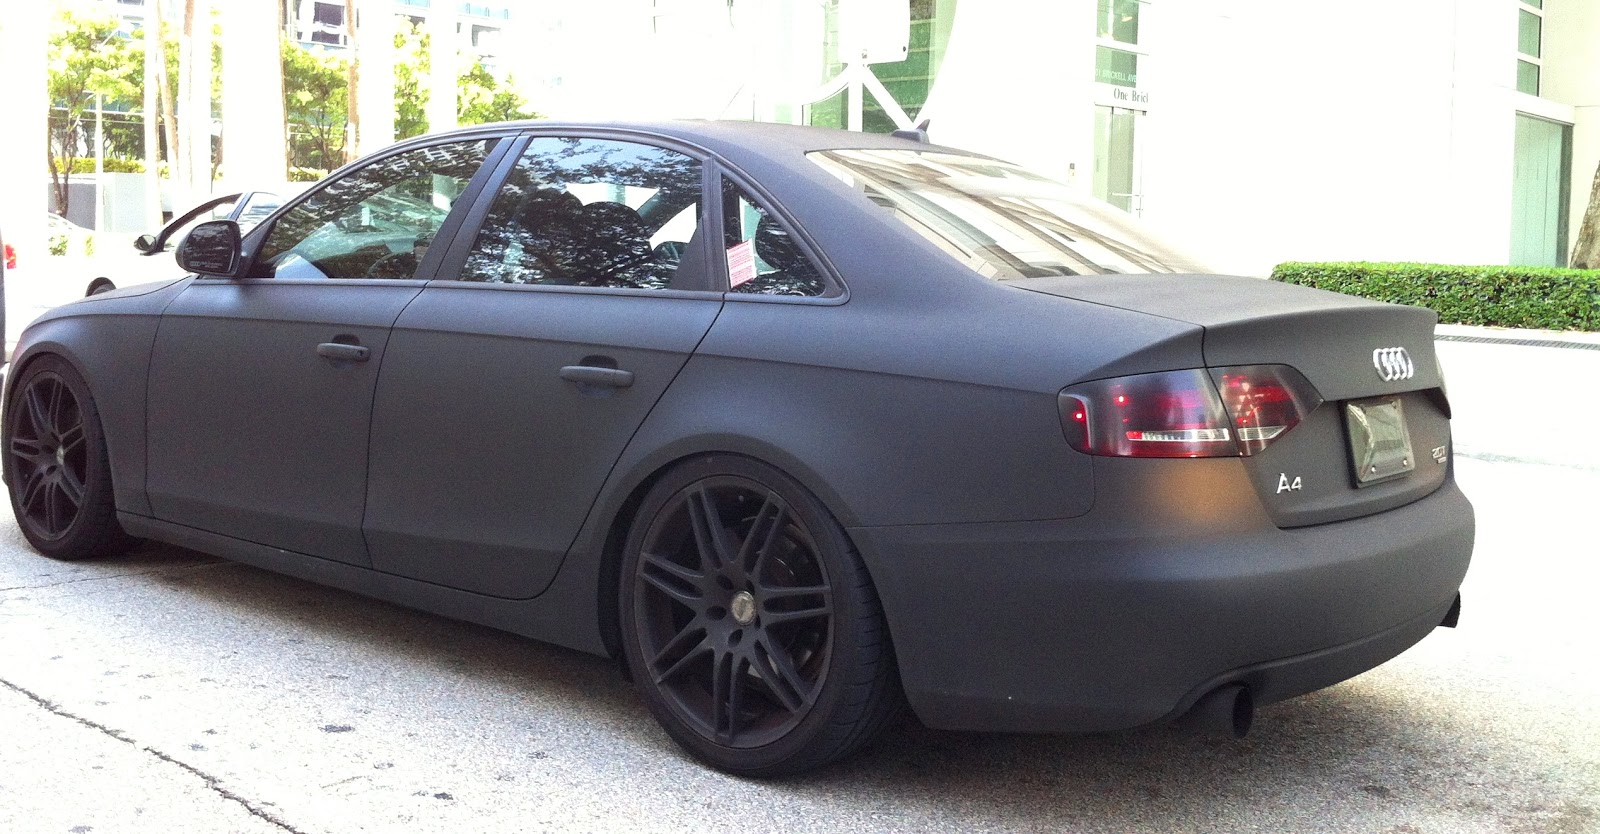 Matte Black Audi A4 downtown Miami | Exotic Cars on the Streets of Miami